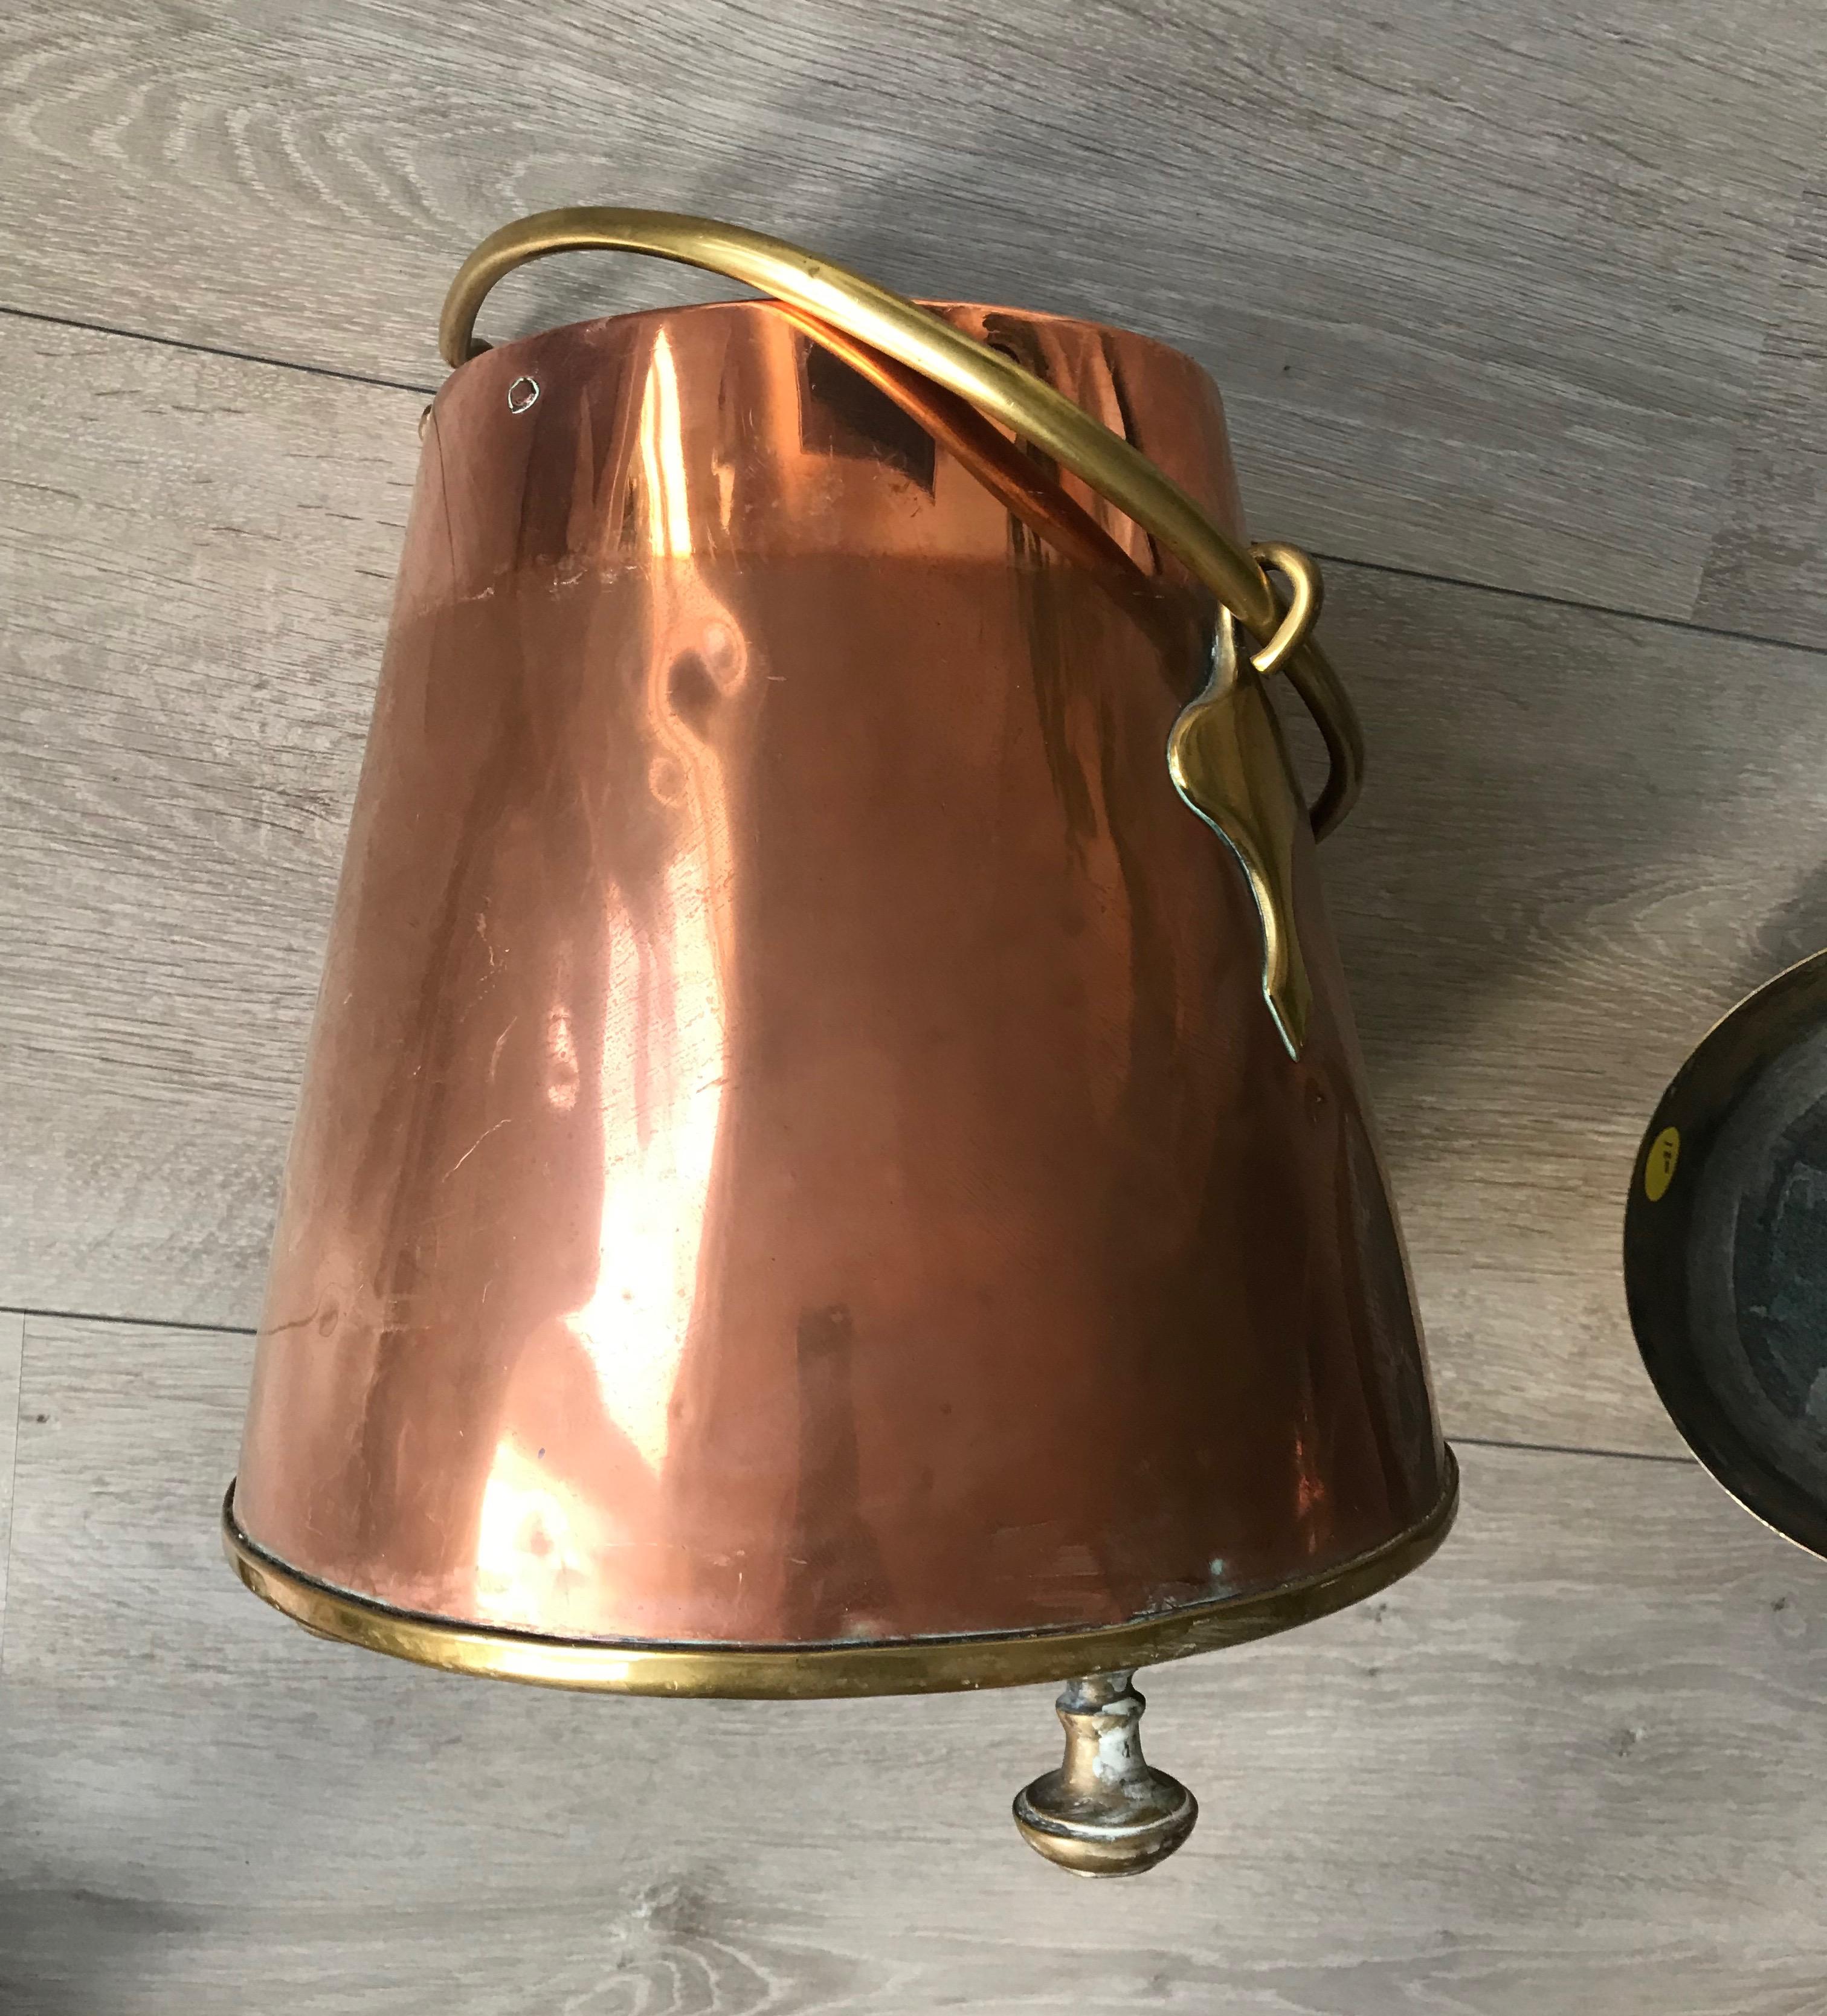 Antique Stylish Copper and Brass Coal Kettle, Fire Extinguisher Fire Place Decor 6